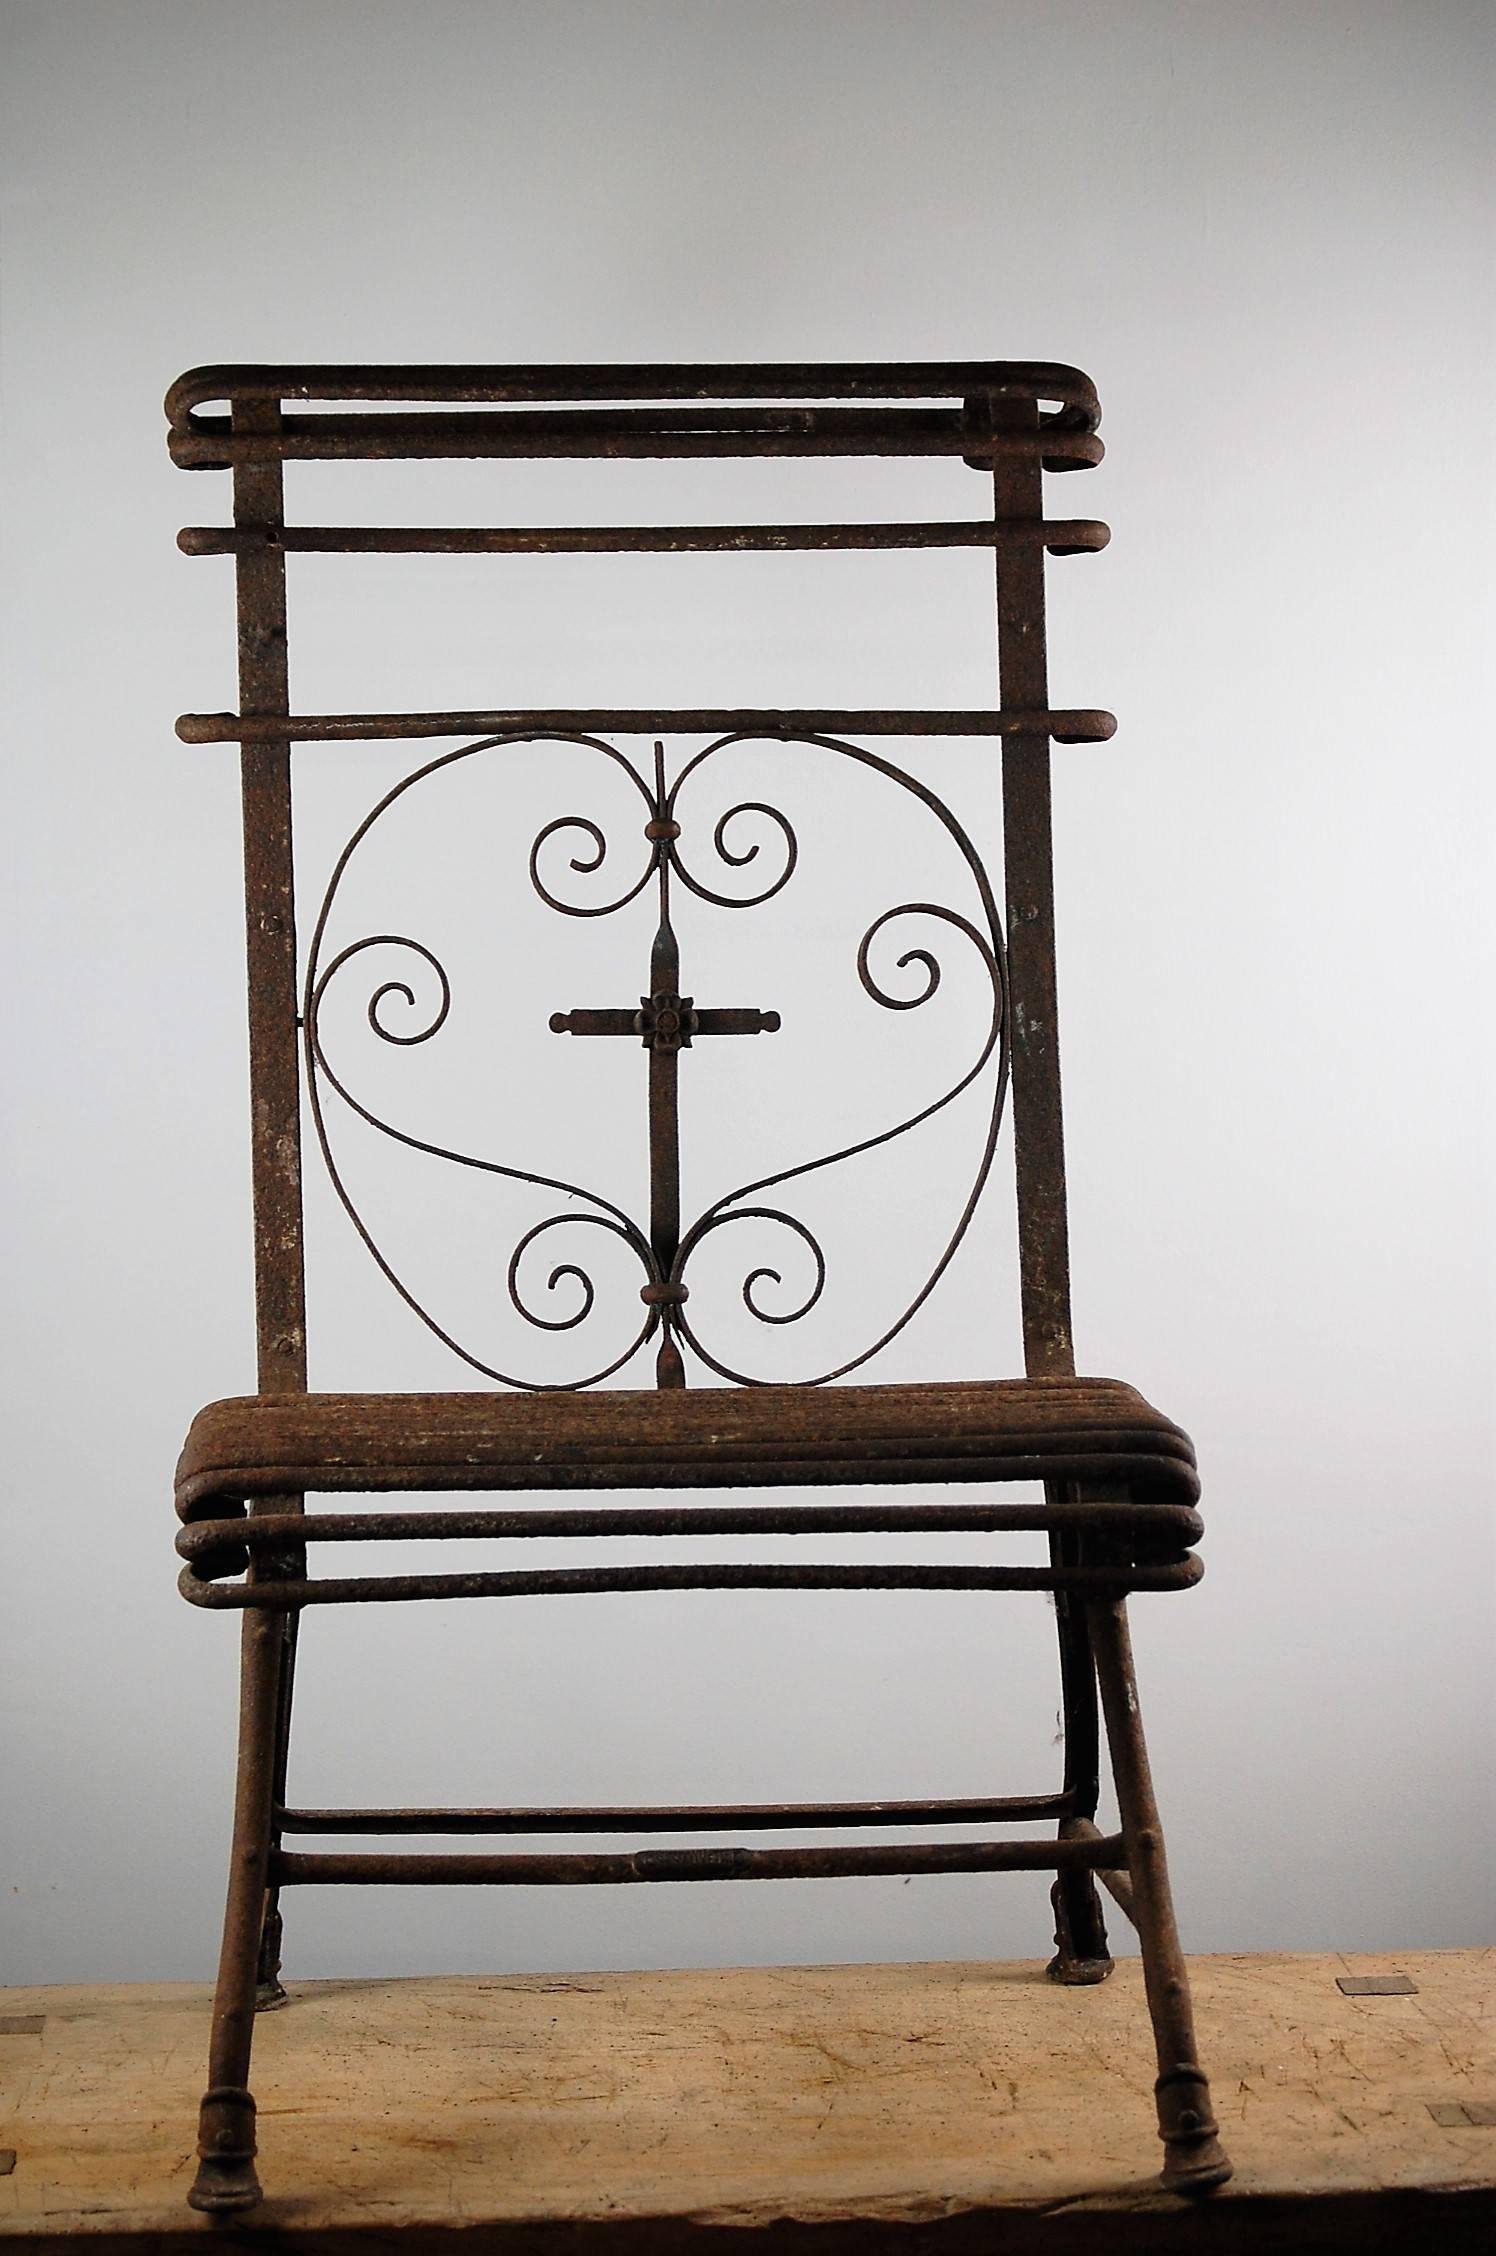 Wonderful Rare French Arras Prie-Dieu or prayer chair, all original with makers badge. Originally intended for private devotional use, this example would have been targeting the aristocracy. Highly intricate ironwork detail, this example is with